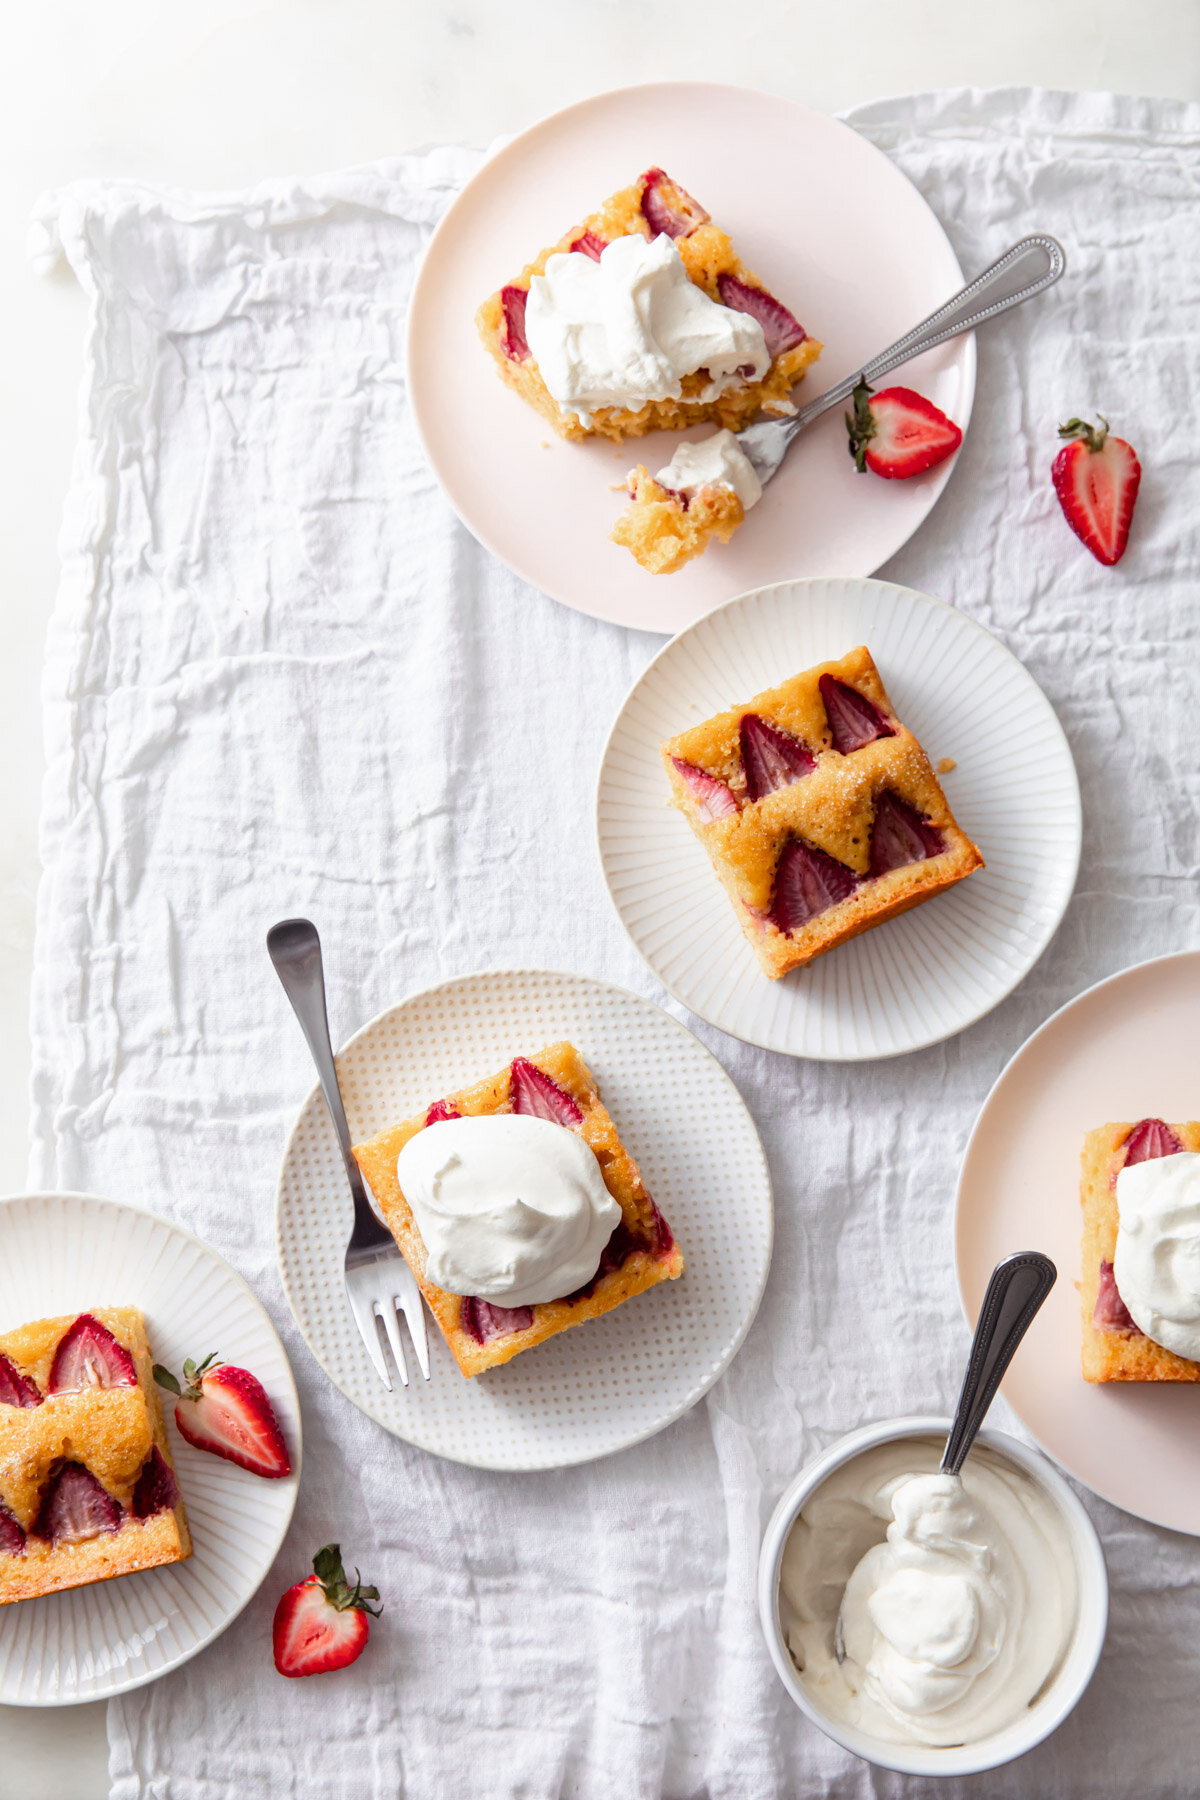 Strawberry Snacking Cake with whipped cream